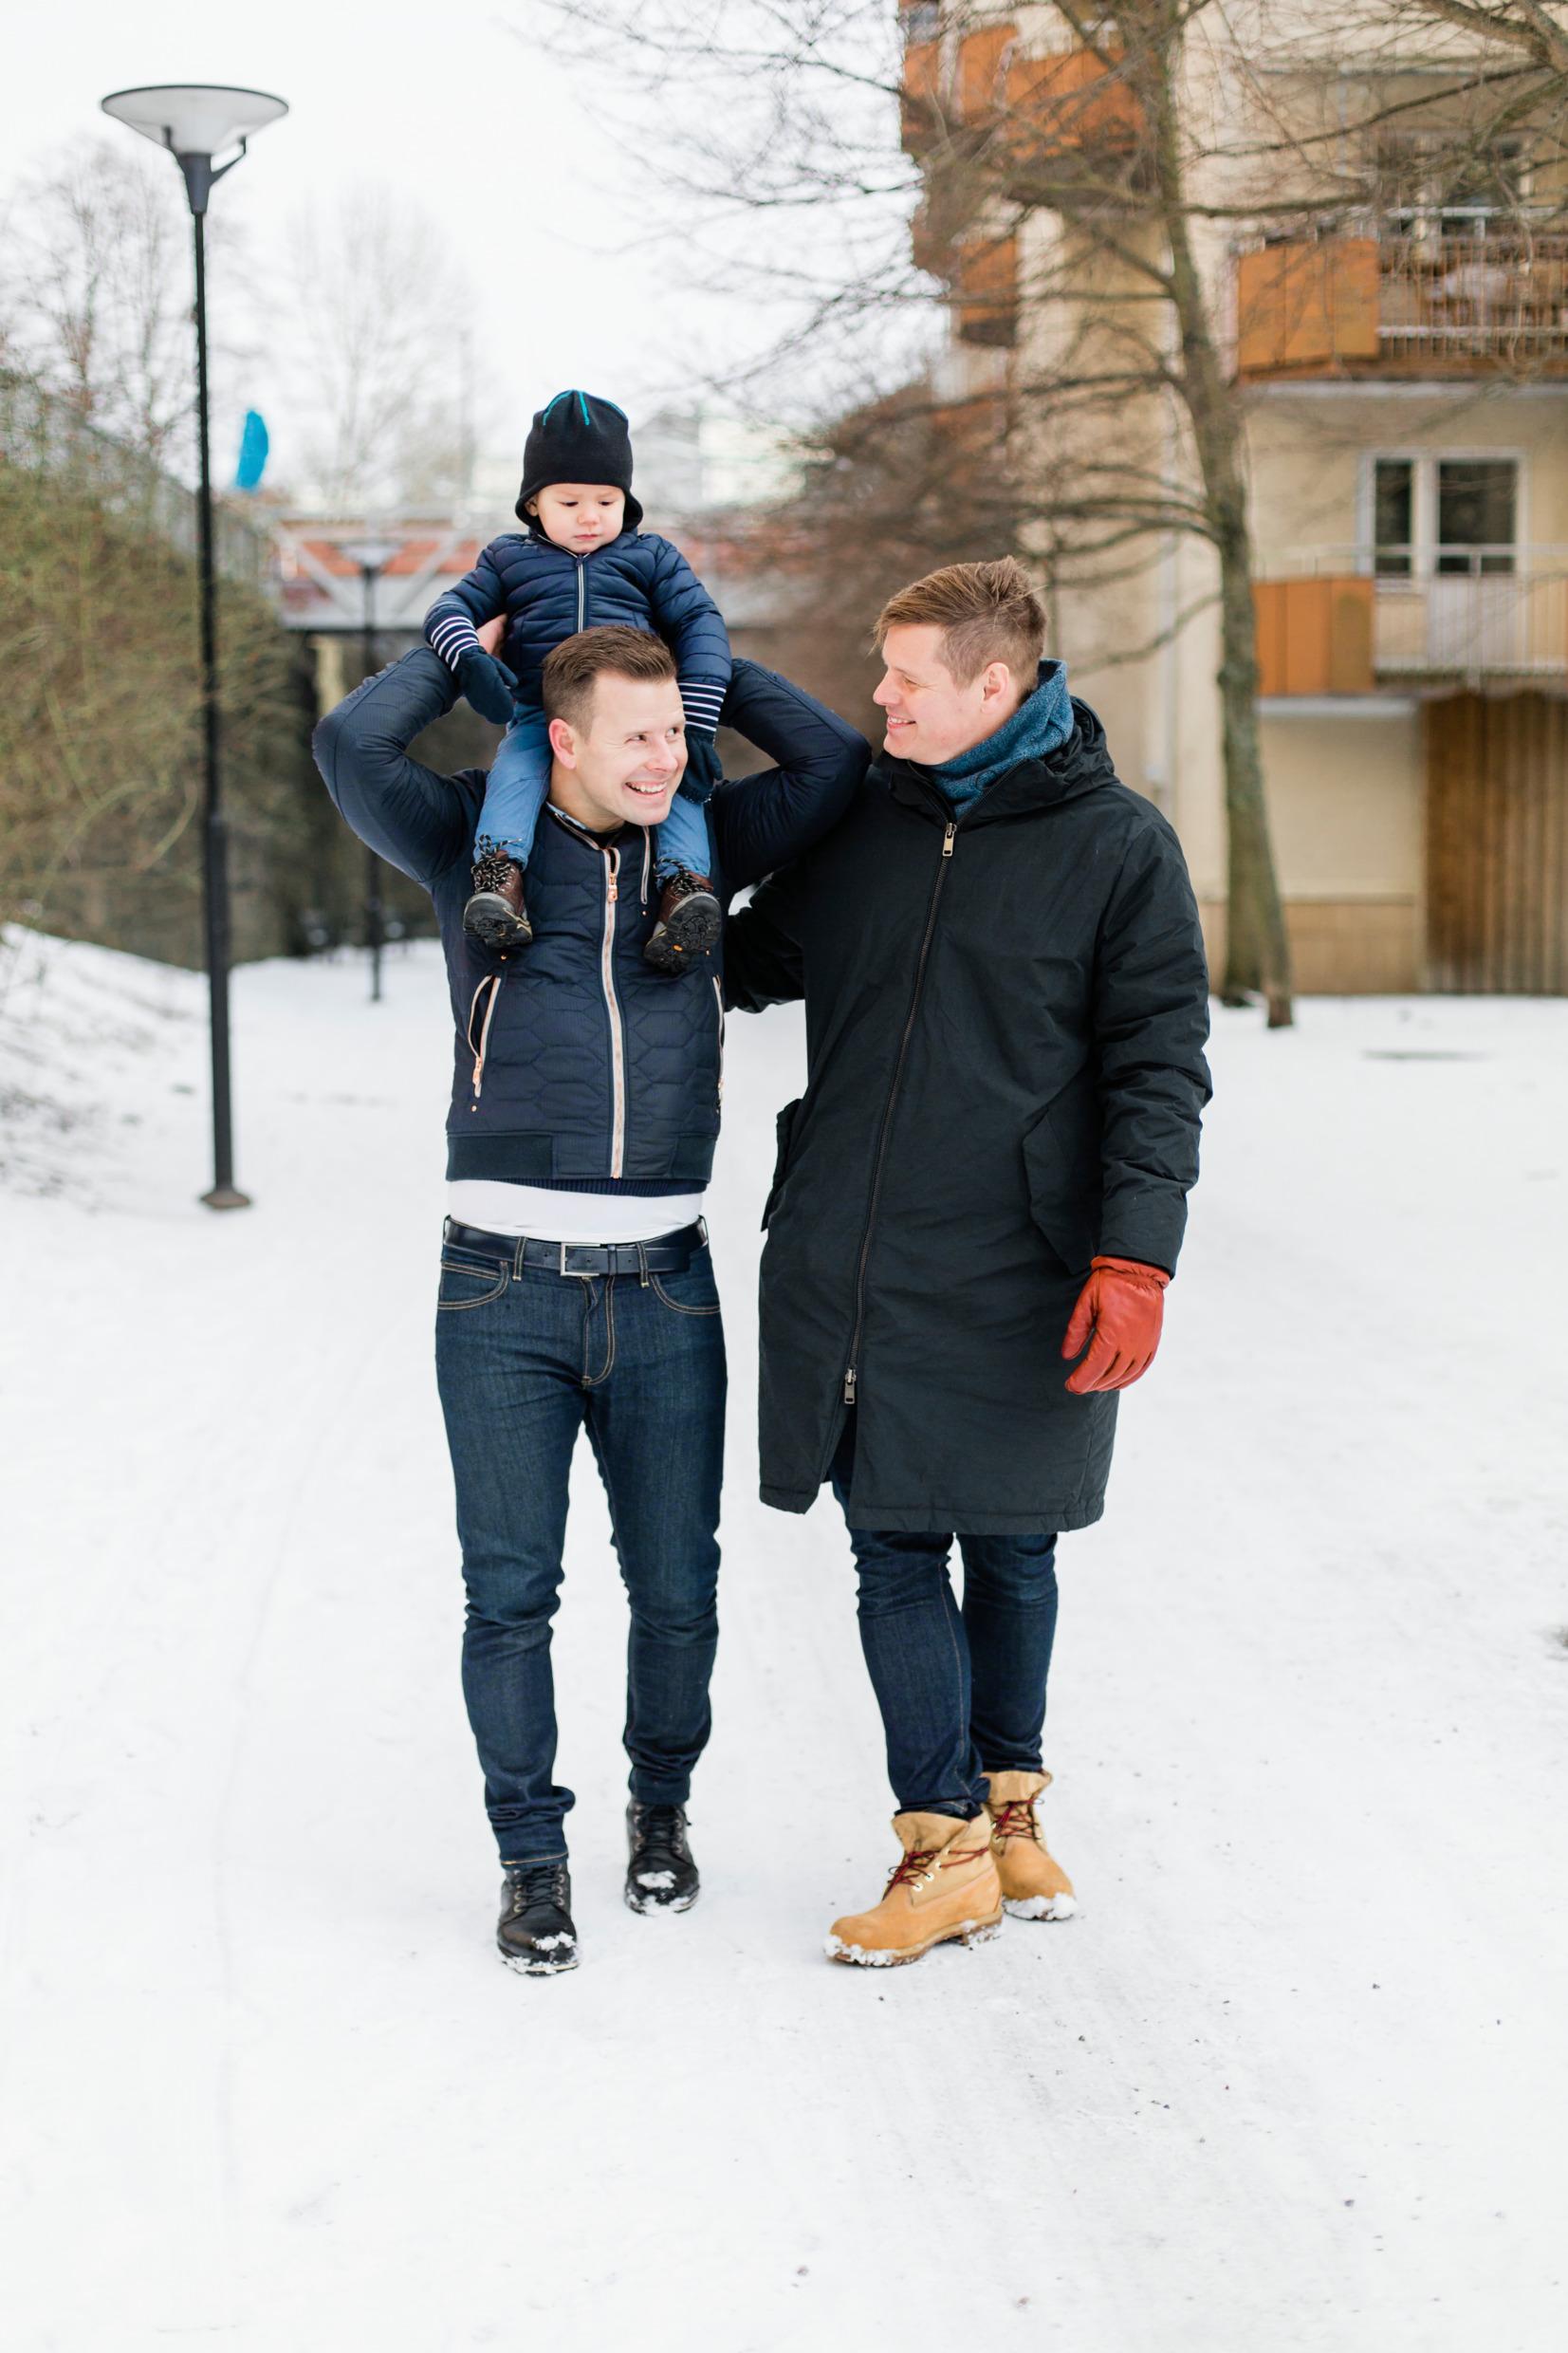 Two men walk down a snow-filled street, embracing, one lifting a child over his head.